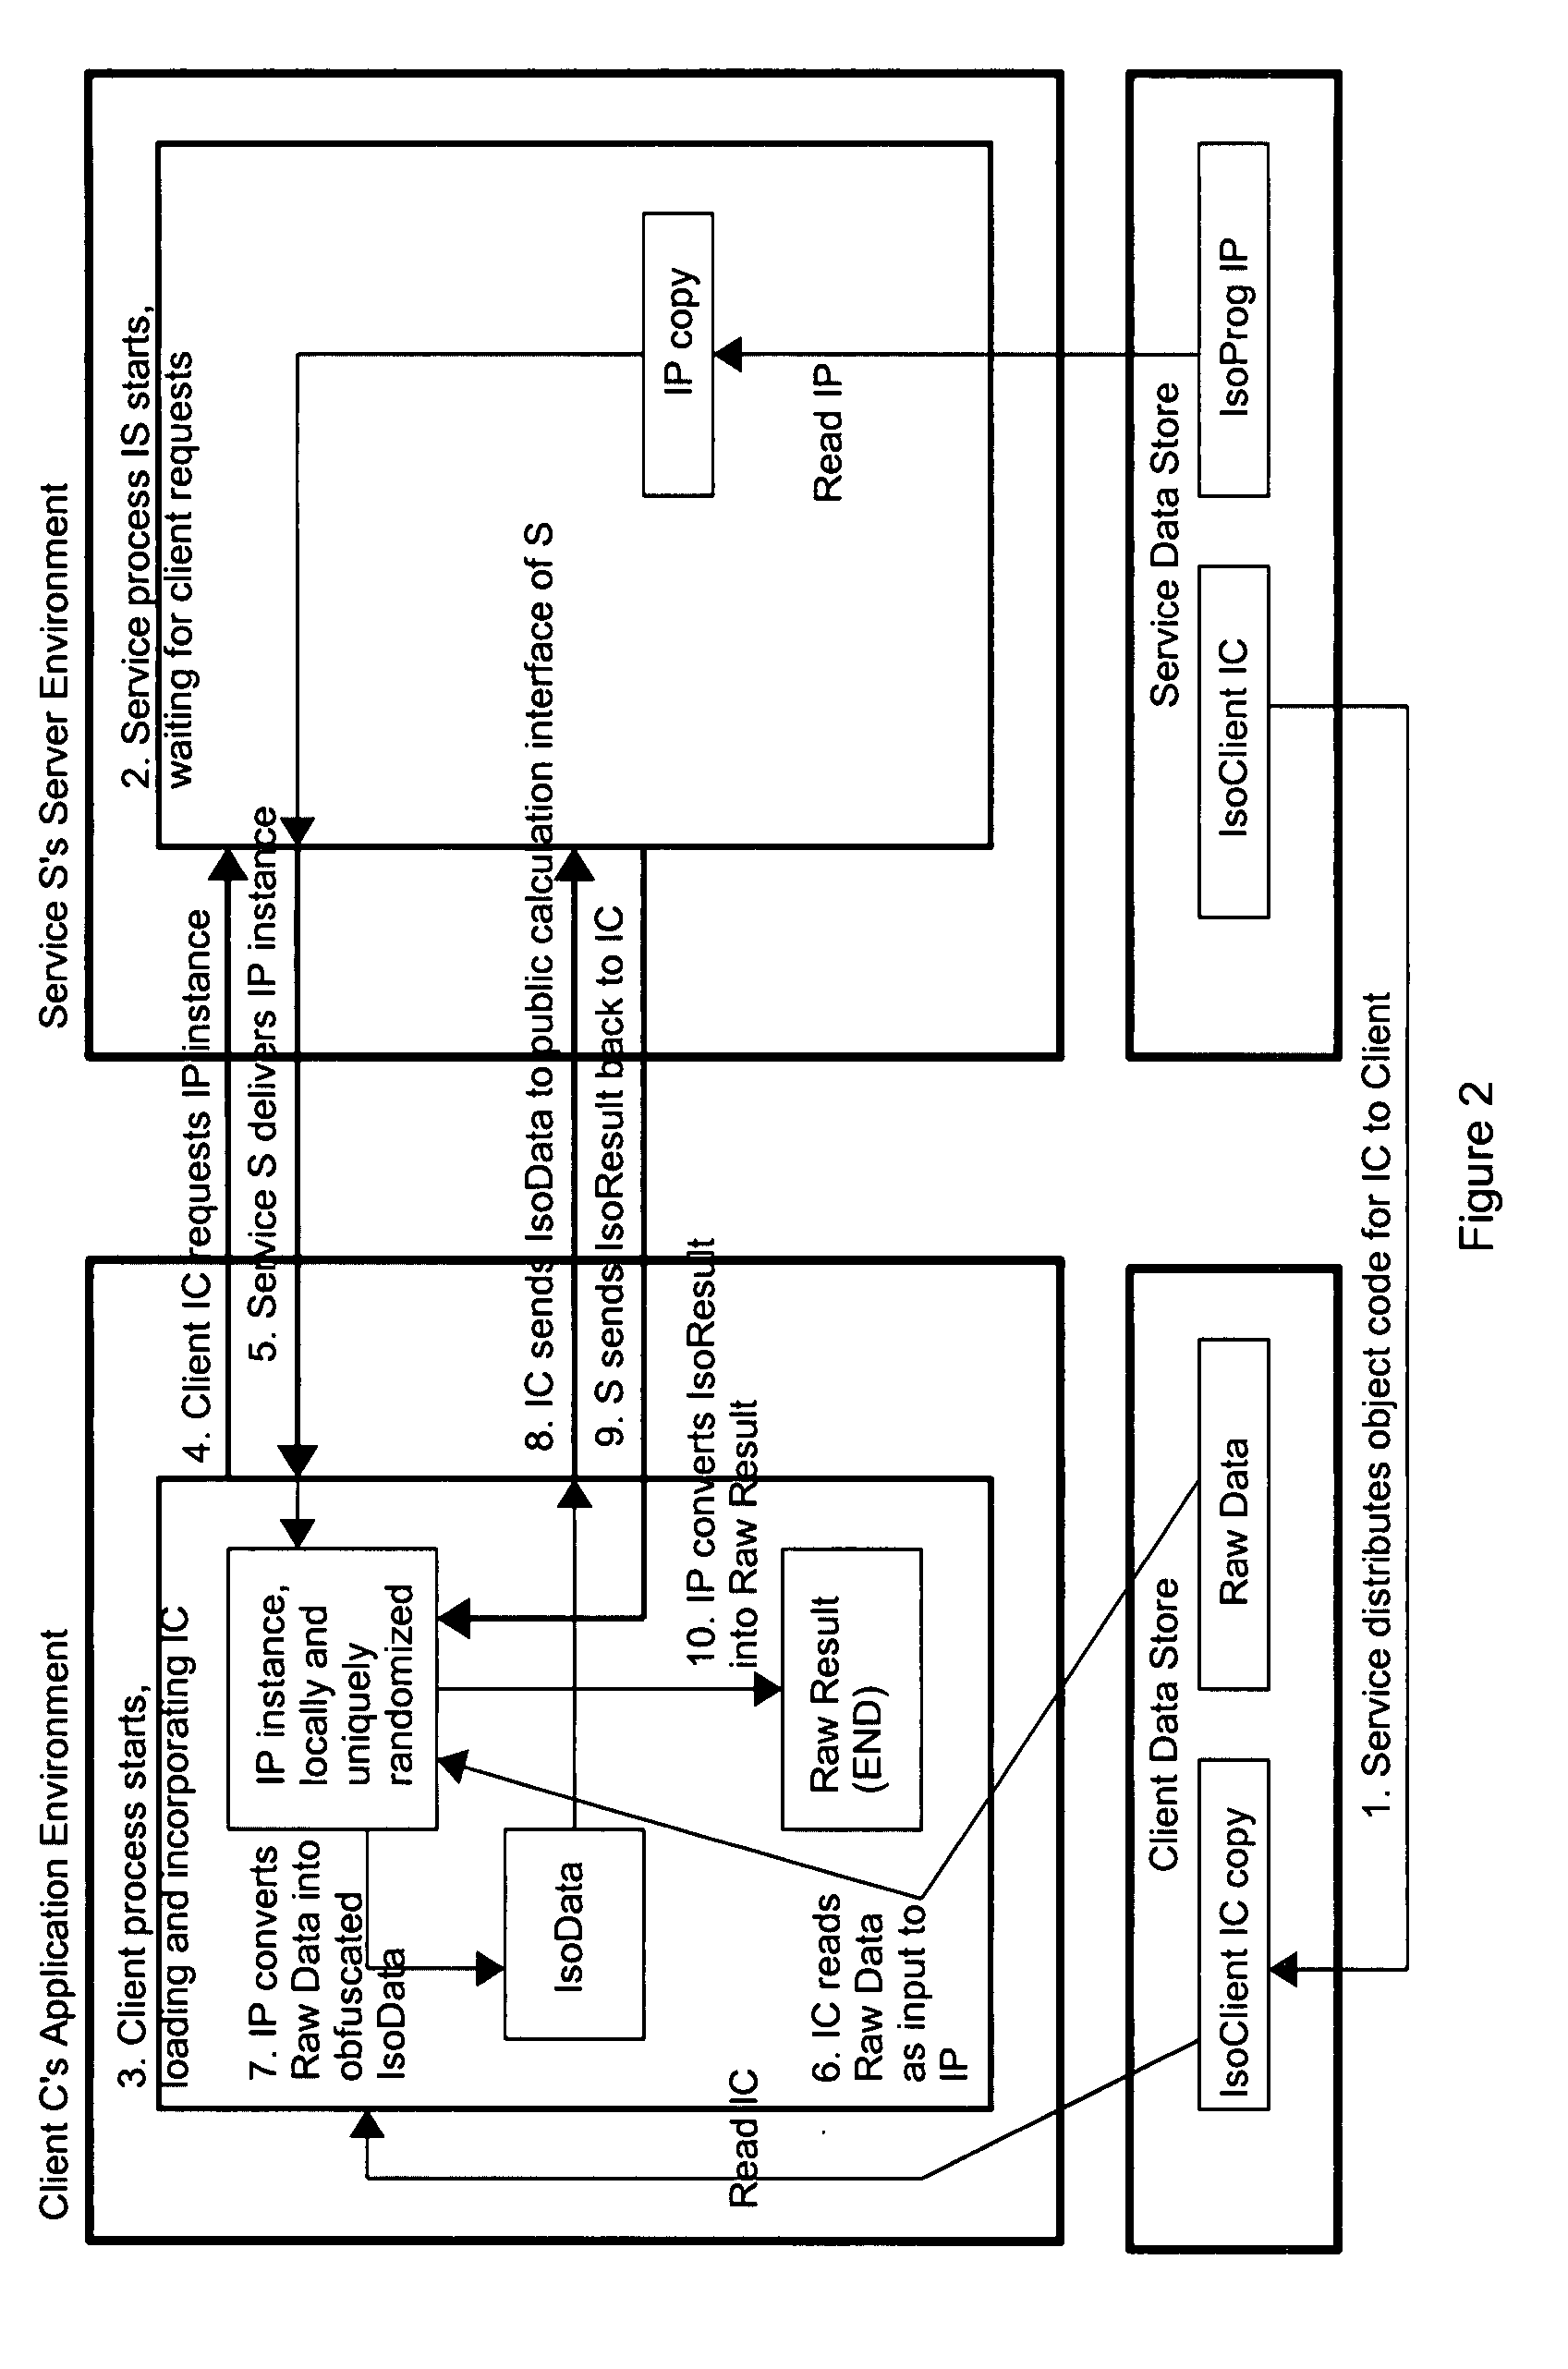 Method and system for protected calculation and transmission of sensitive data